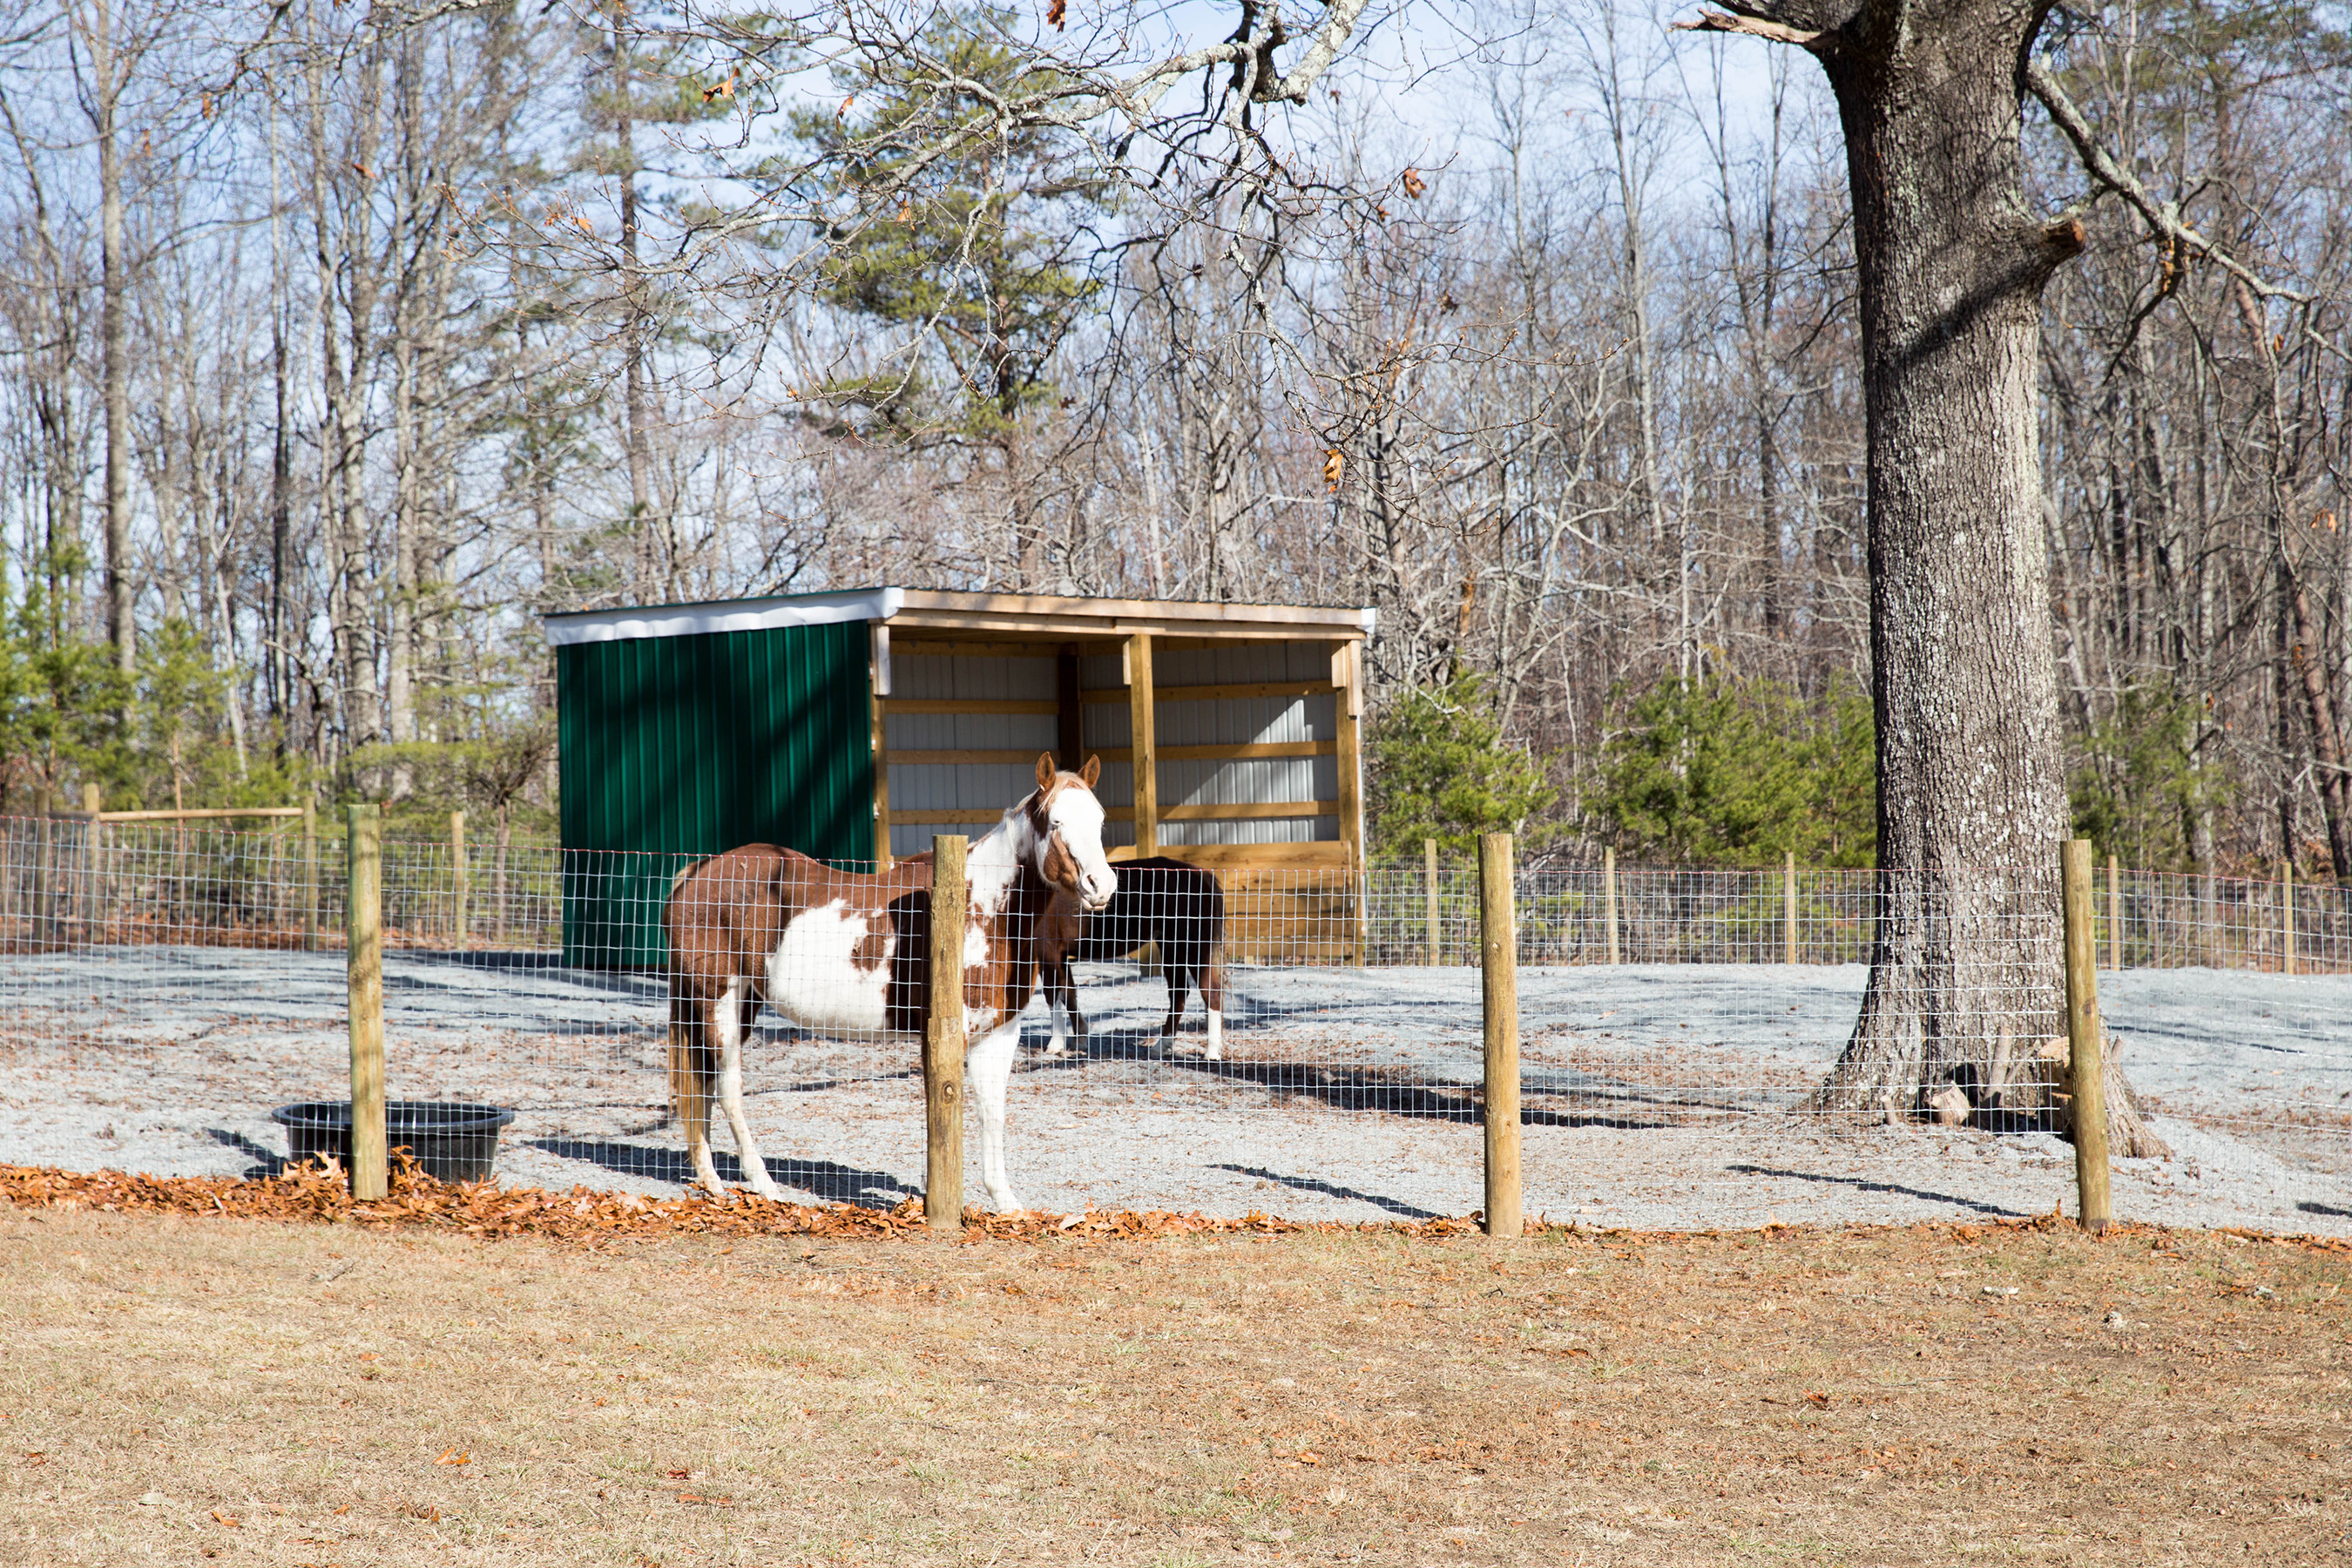 Blazing Hope Ranch uses horses rescued from poor or abusive conditions as part of their therapy program.